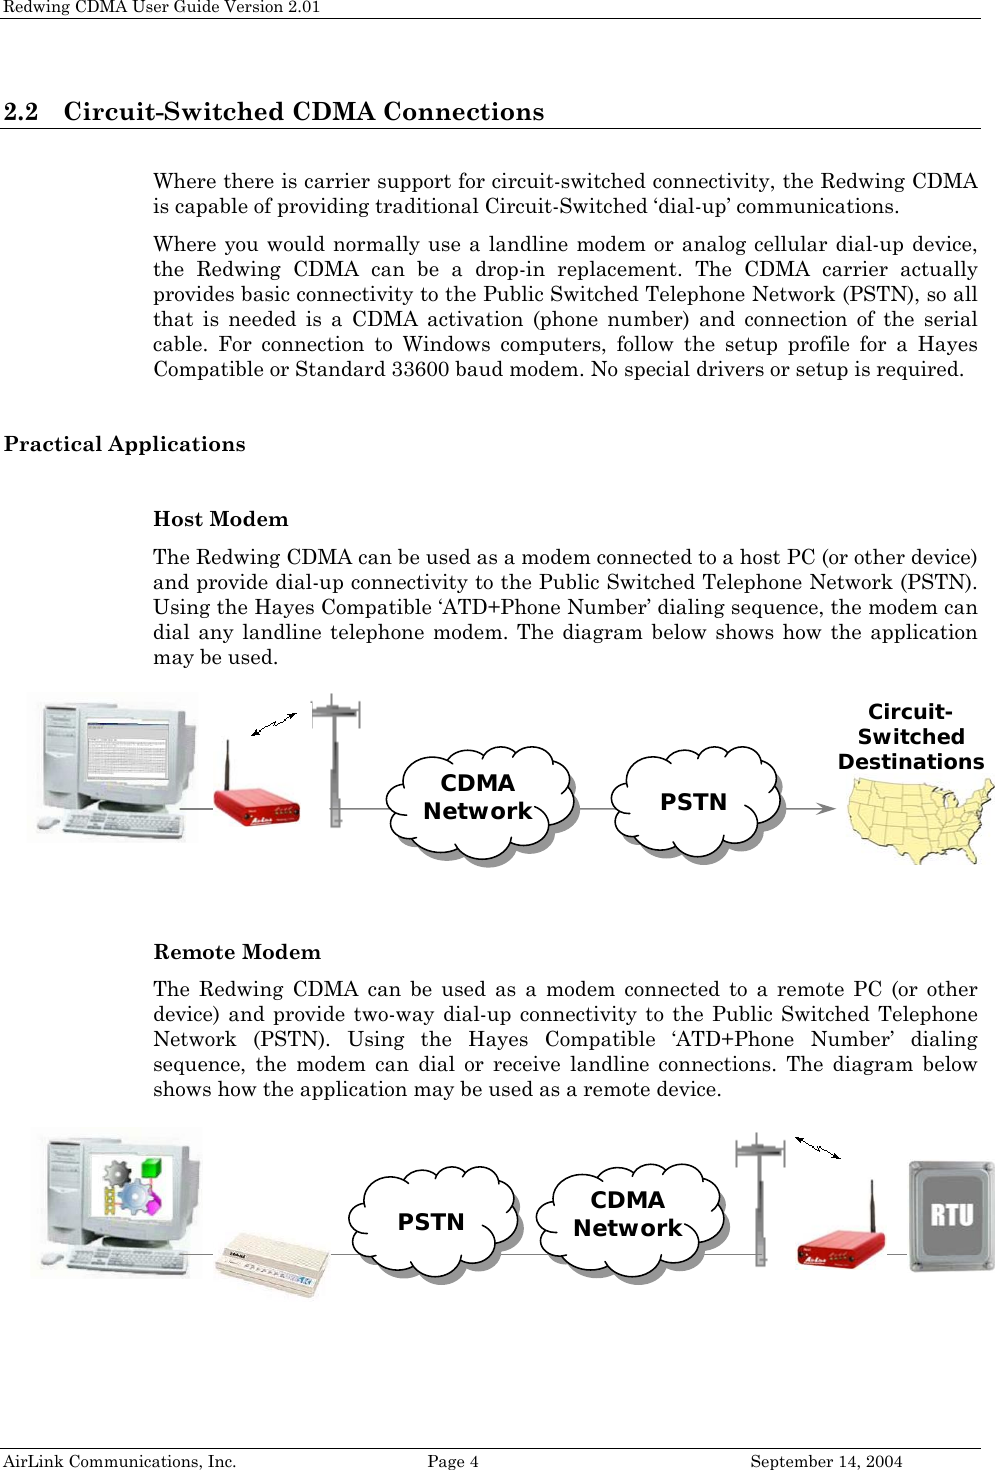 Redwing CDMA User Guide Version 2.01 2.2 Circuit-Switched CDMA Connections   Where there is carrier support for circuit-switched connectivity, the Redwing CDMA is capable of providing traditional Circuit-Switched ‘dial-up’ communications.  Where you would normally use a landline modem or analog cellular dial-up device, the Redwing CDMA can be a drop-in replacement. The CDMA carrier actually provides basic connectivity to the Public Switched Telephone Network (PSTN), so all that is needed is a CDMA activation (phone number) and connection of the serial cable. For connection to Windows computers, follow the setup profile for a Hayes Compatible or Standard 33600 baud modem. No special drivers or setup is required.  Practical Applications  Host Modem The Redwing CDMA can be used as a modem connected to a host PC (or other device) and provide dial-up connectivity to the Public Switched Telephone Network (PSTN). Using the Hayes Compatible ‘ATD+Phone Number’ dialing sequence, the modem can dial any landline telephone modem. The diagram below shows how the application may be used.    PSTN CDMA Network  Circuit- Switched Destinations     Remote Modem The Redwing CDMA can be used as a modem connected to a remote PC (or other device) and provide two-way dial-up connectivity to the Public Switched Telephone Network (PSTN). Using the Hayes Compatible ‘ATD+Phone Number’ dialing sequence, the modem can dial or receive landline connections. The diagram below shows how the application may be used as a remote device.   PSTN  CDMA Network           AirLink Communications, Inc.  Page 4  September 14, 2004 